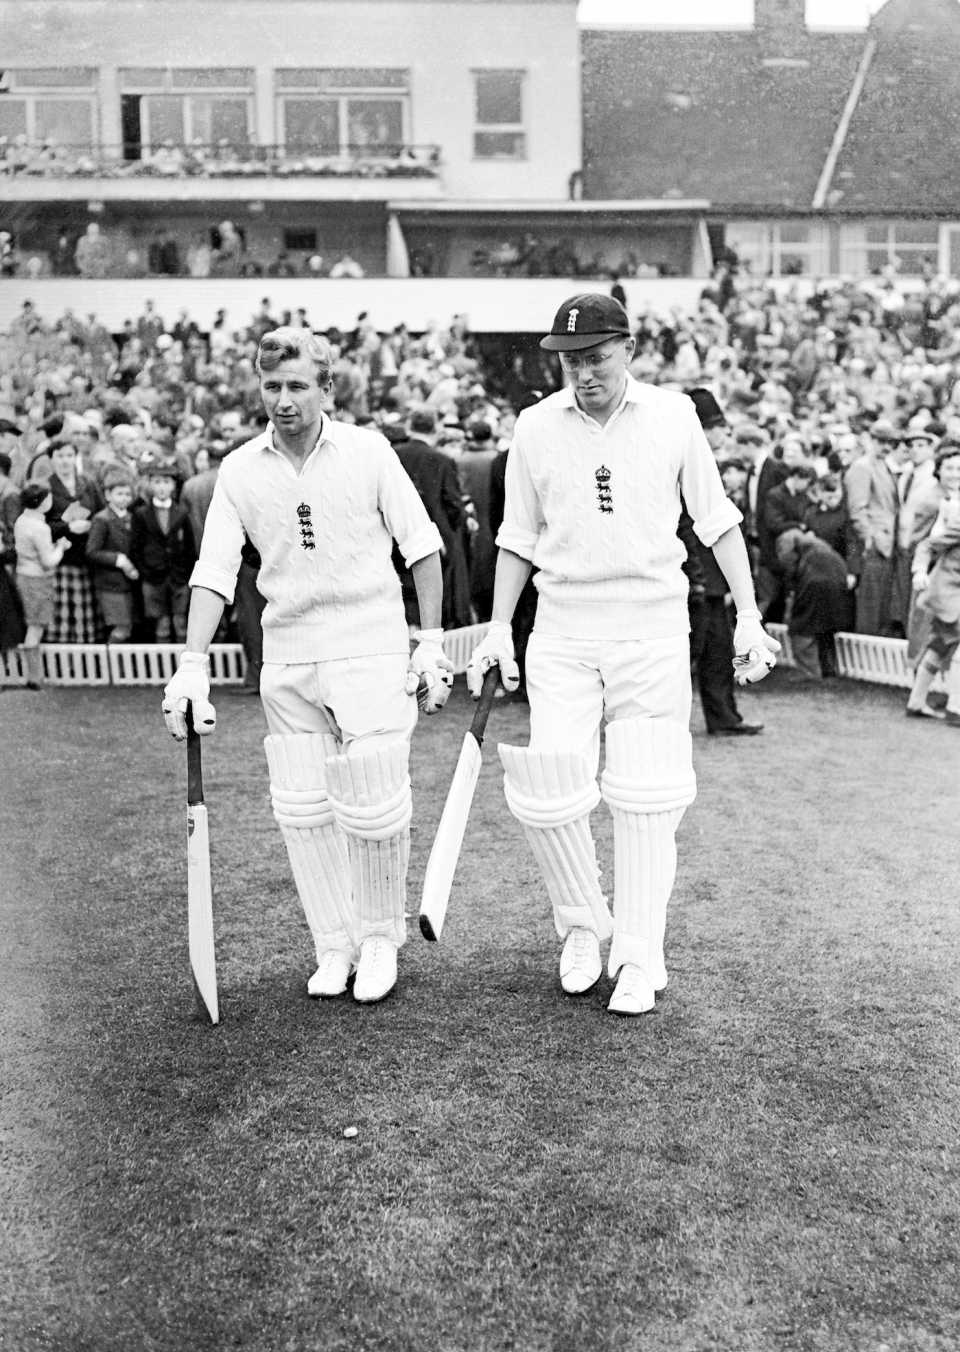 Arthur Milton and Mike Smith walk out to open the batting in England's first innings